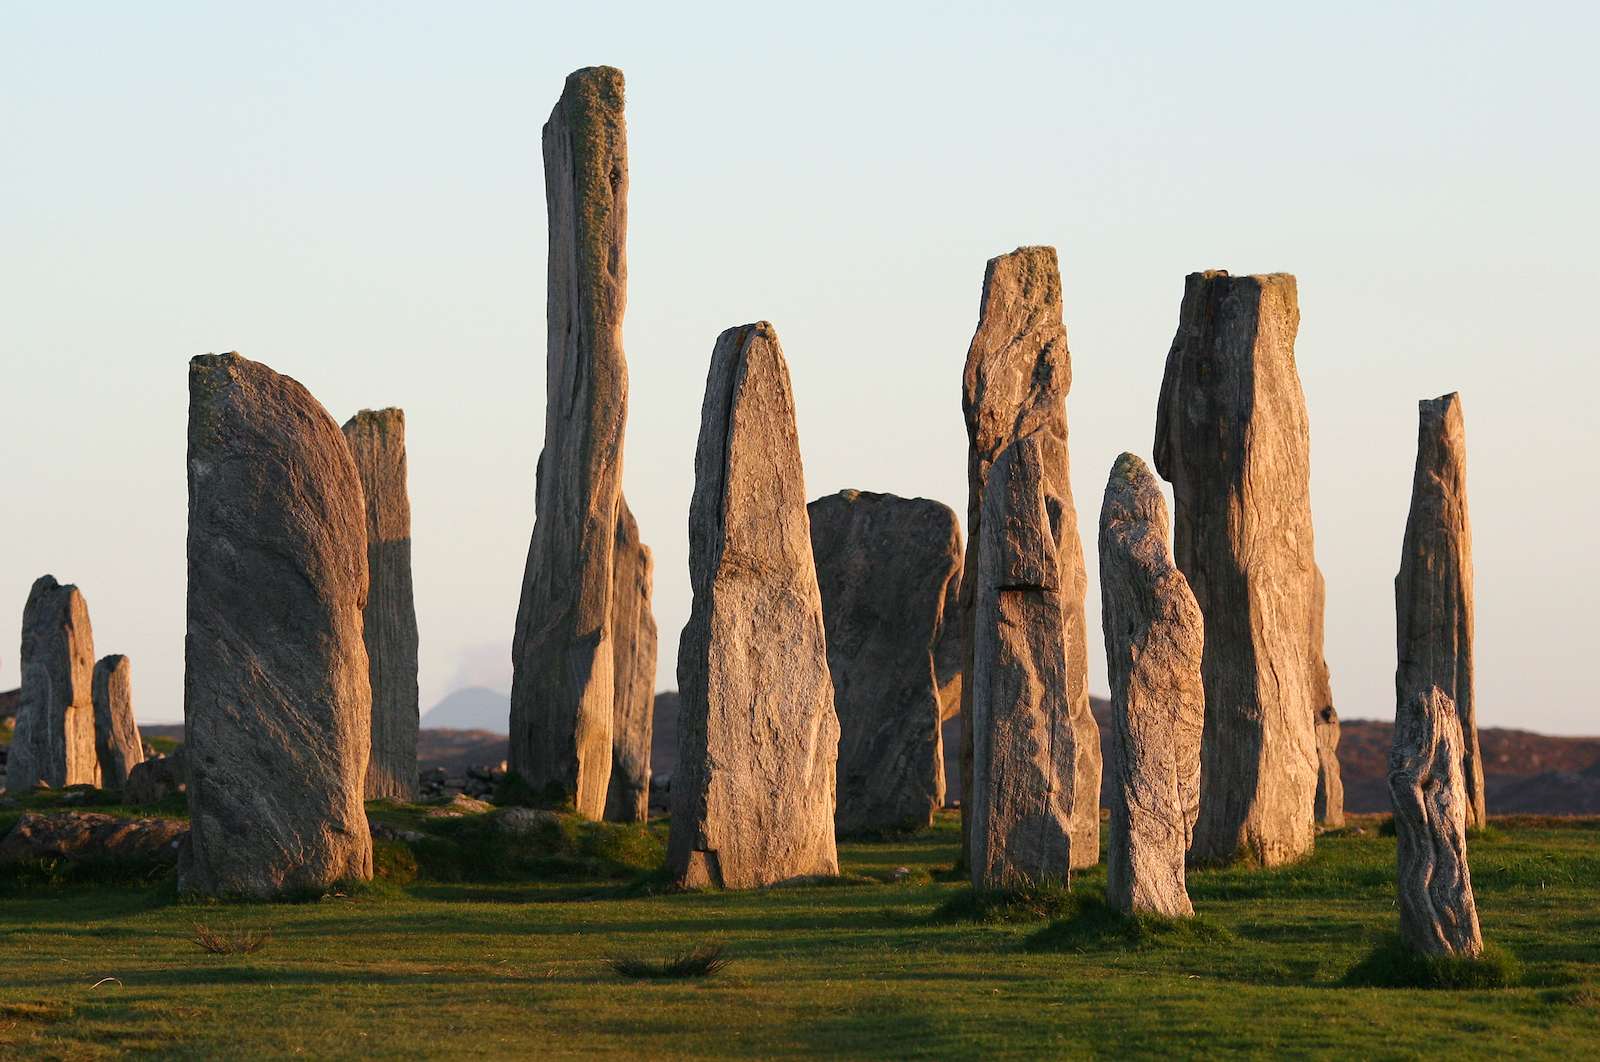 Standing stone circle, Callanish, Outer Hebrides. Photographed in late evening sunlight.